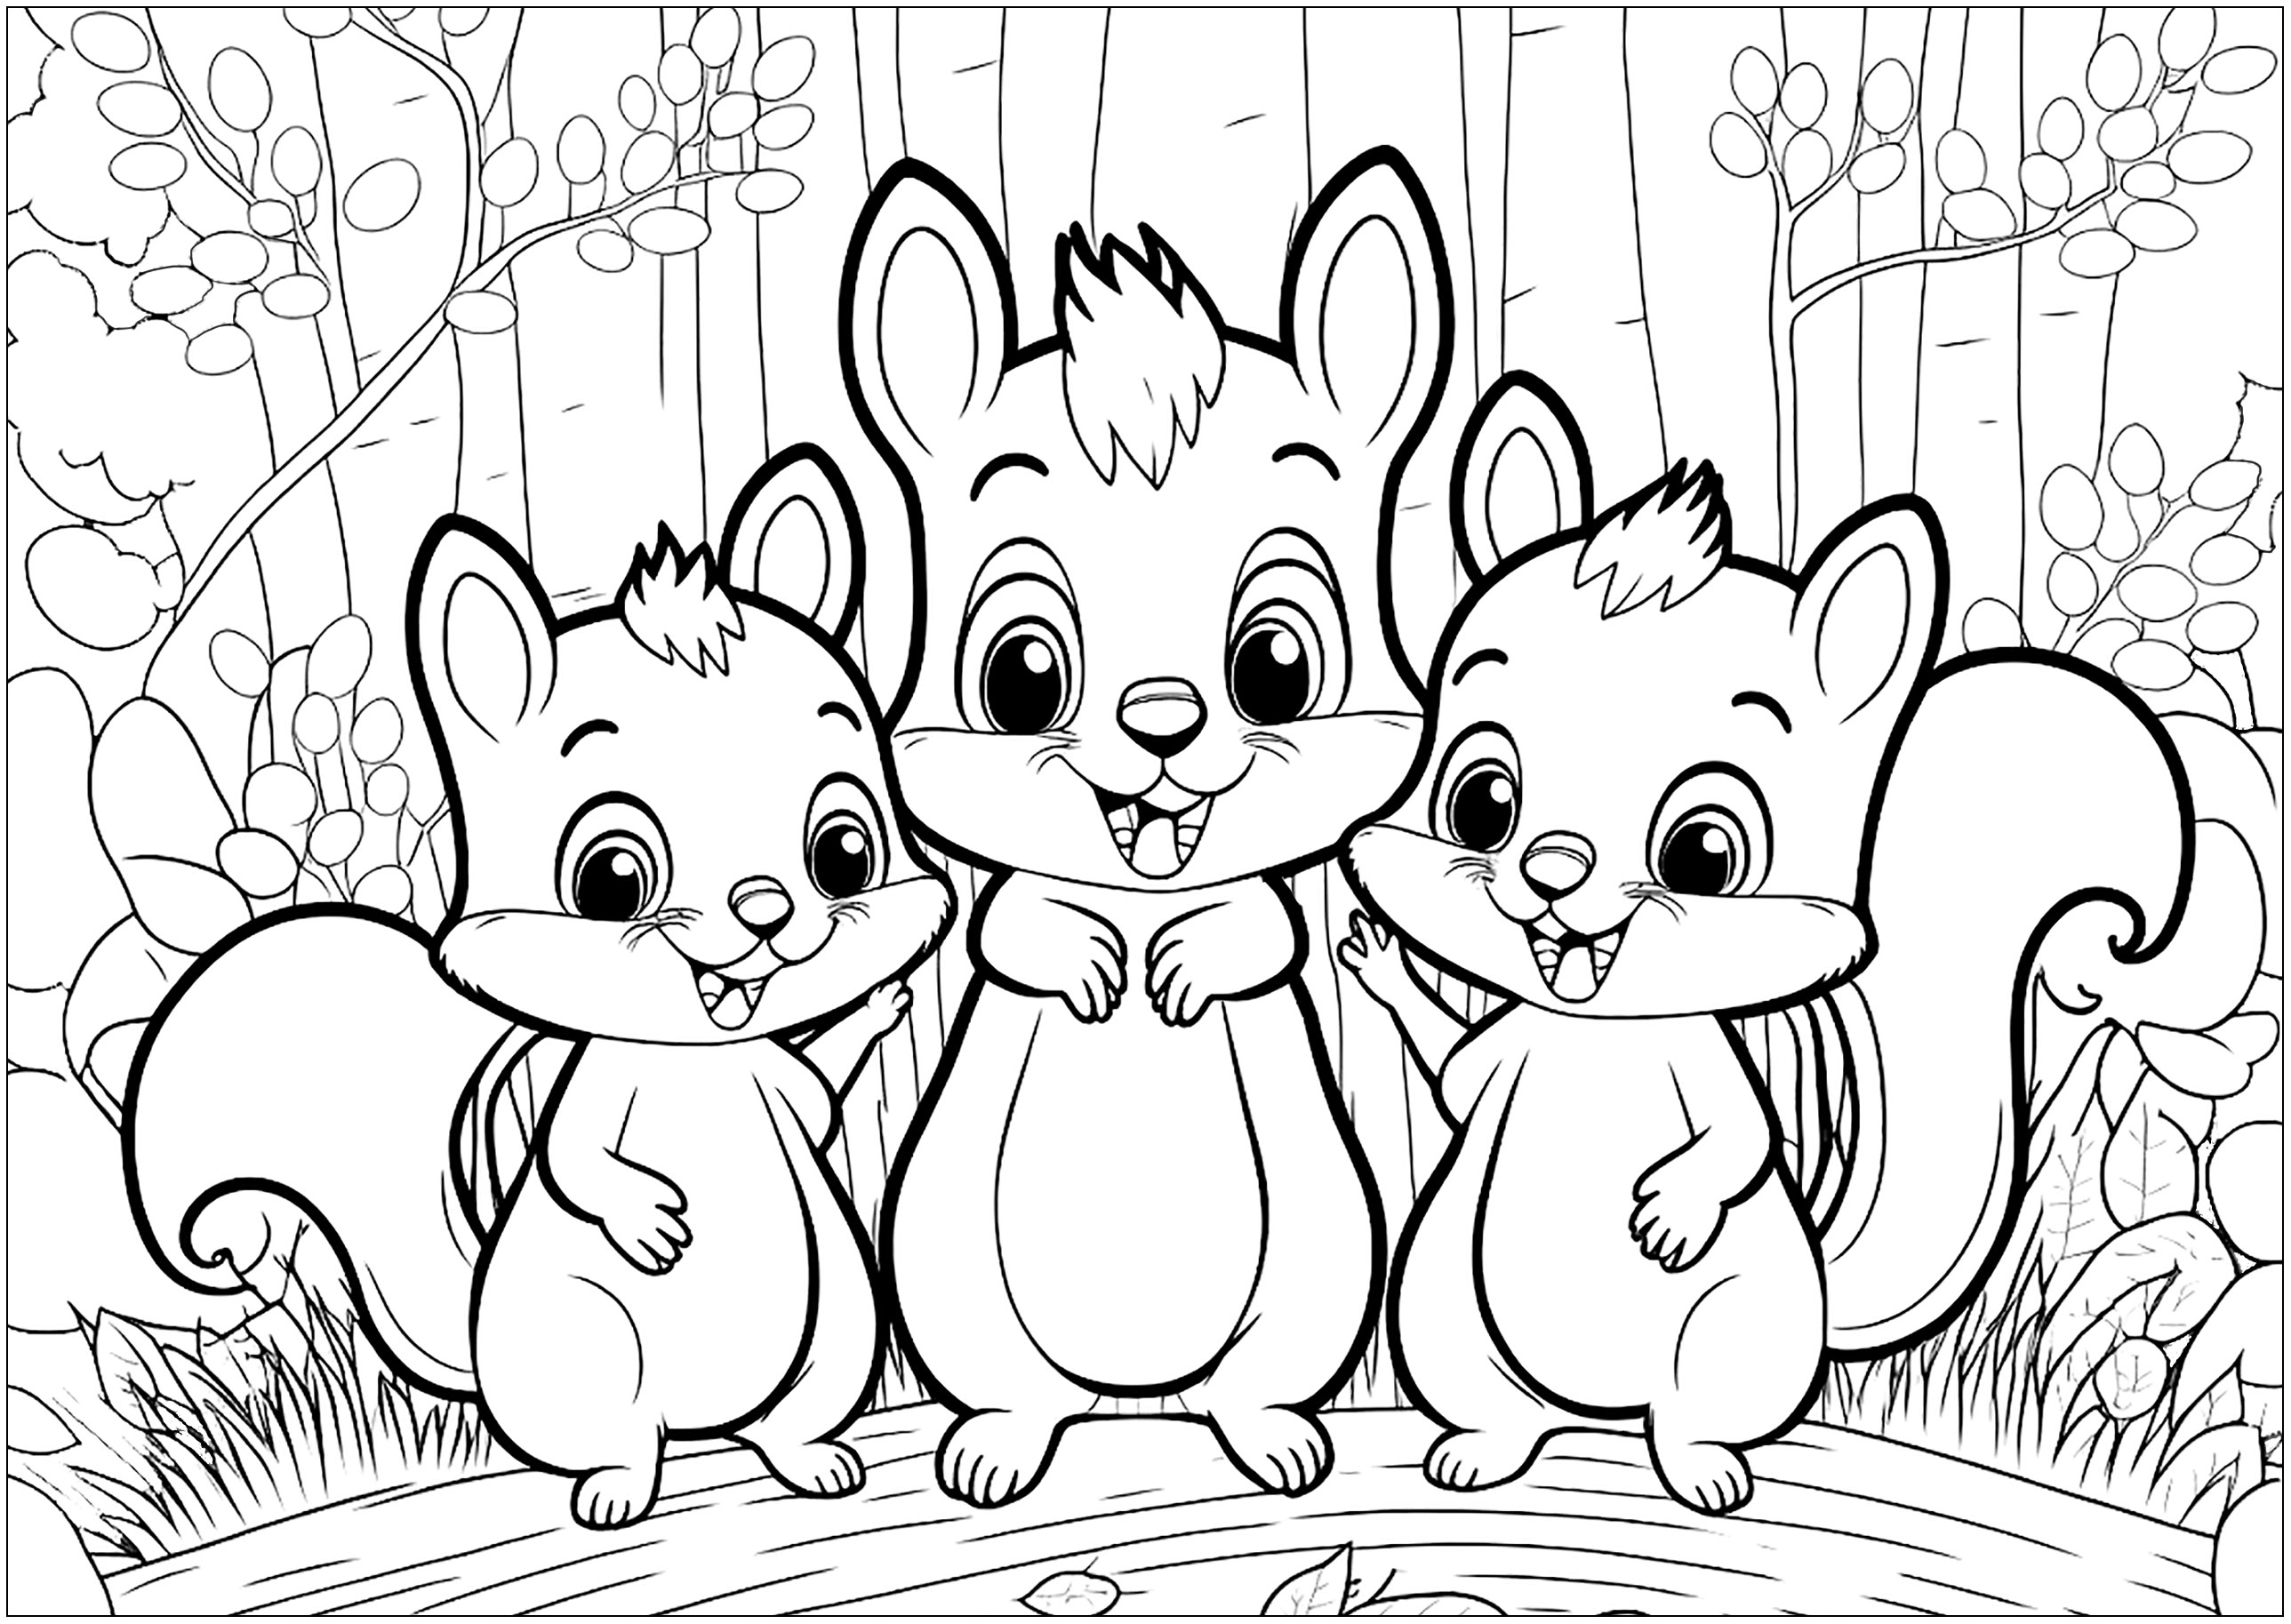 Three funny little squirrels in the forest